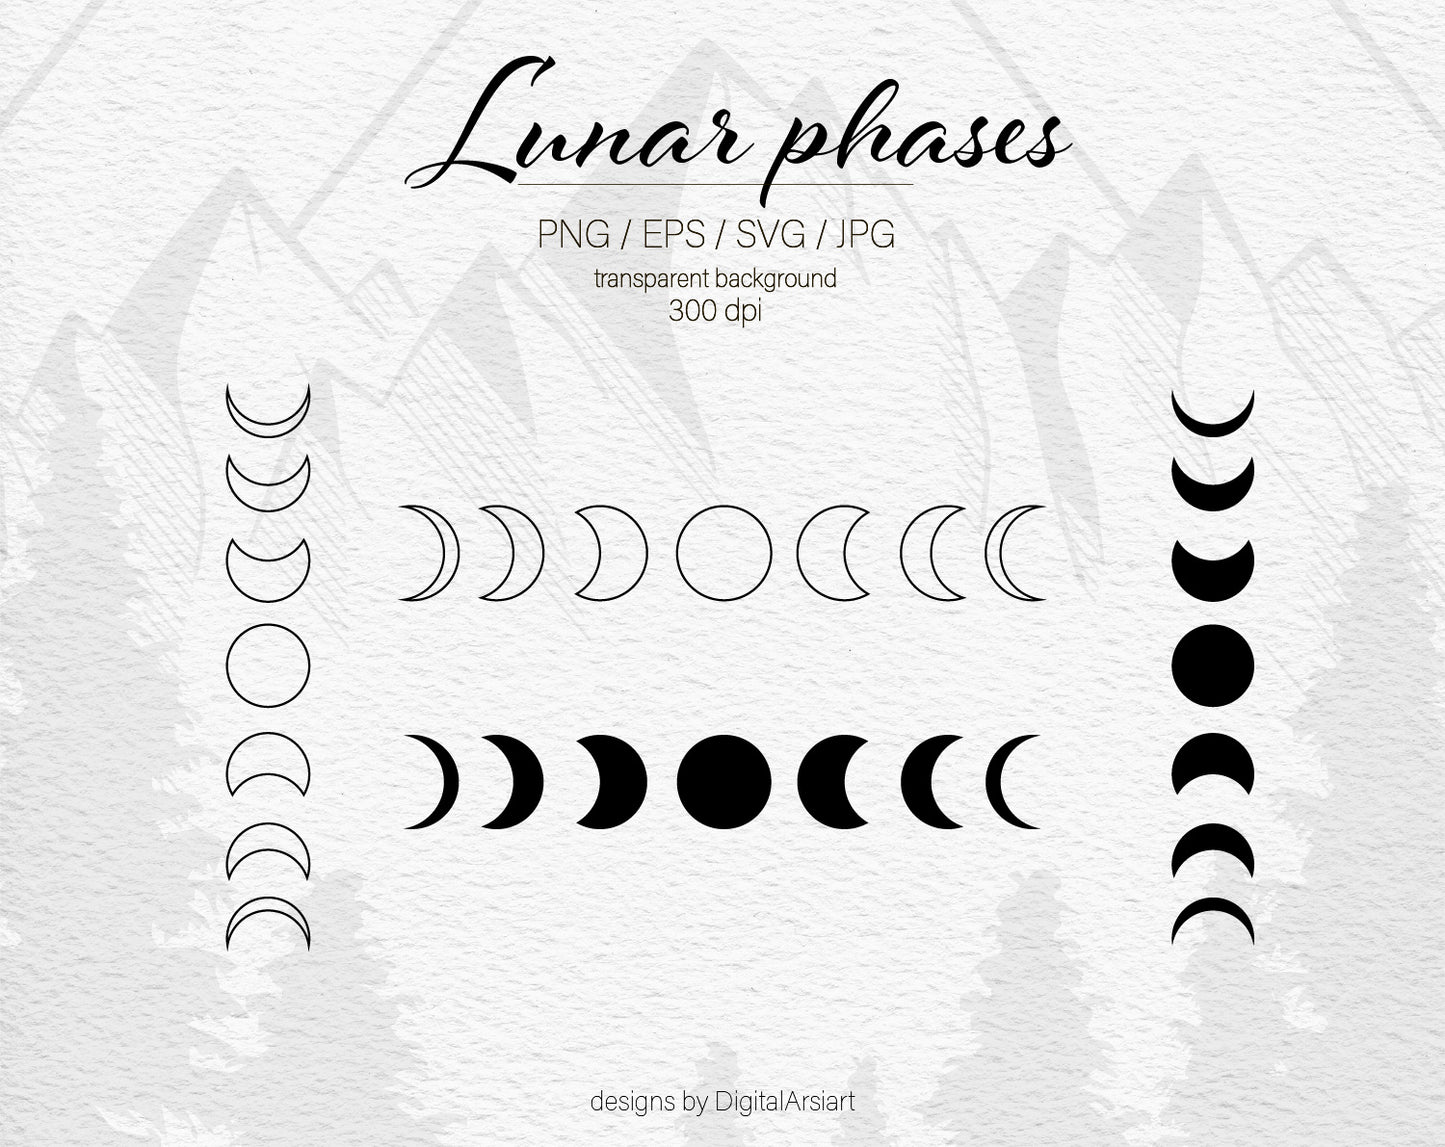 Moon phases svg - 0475